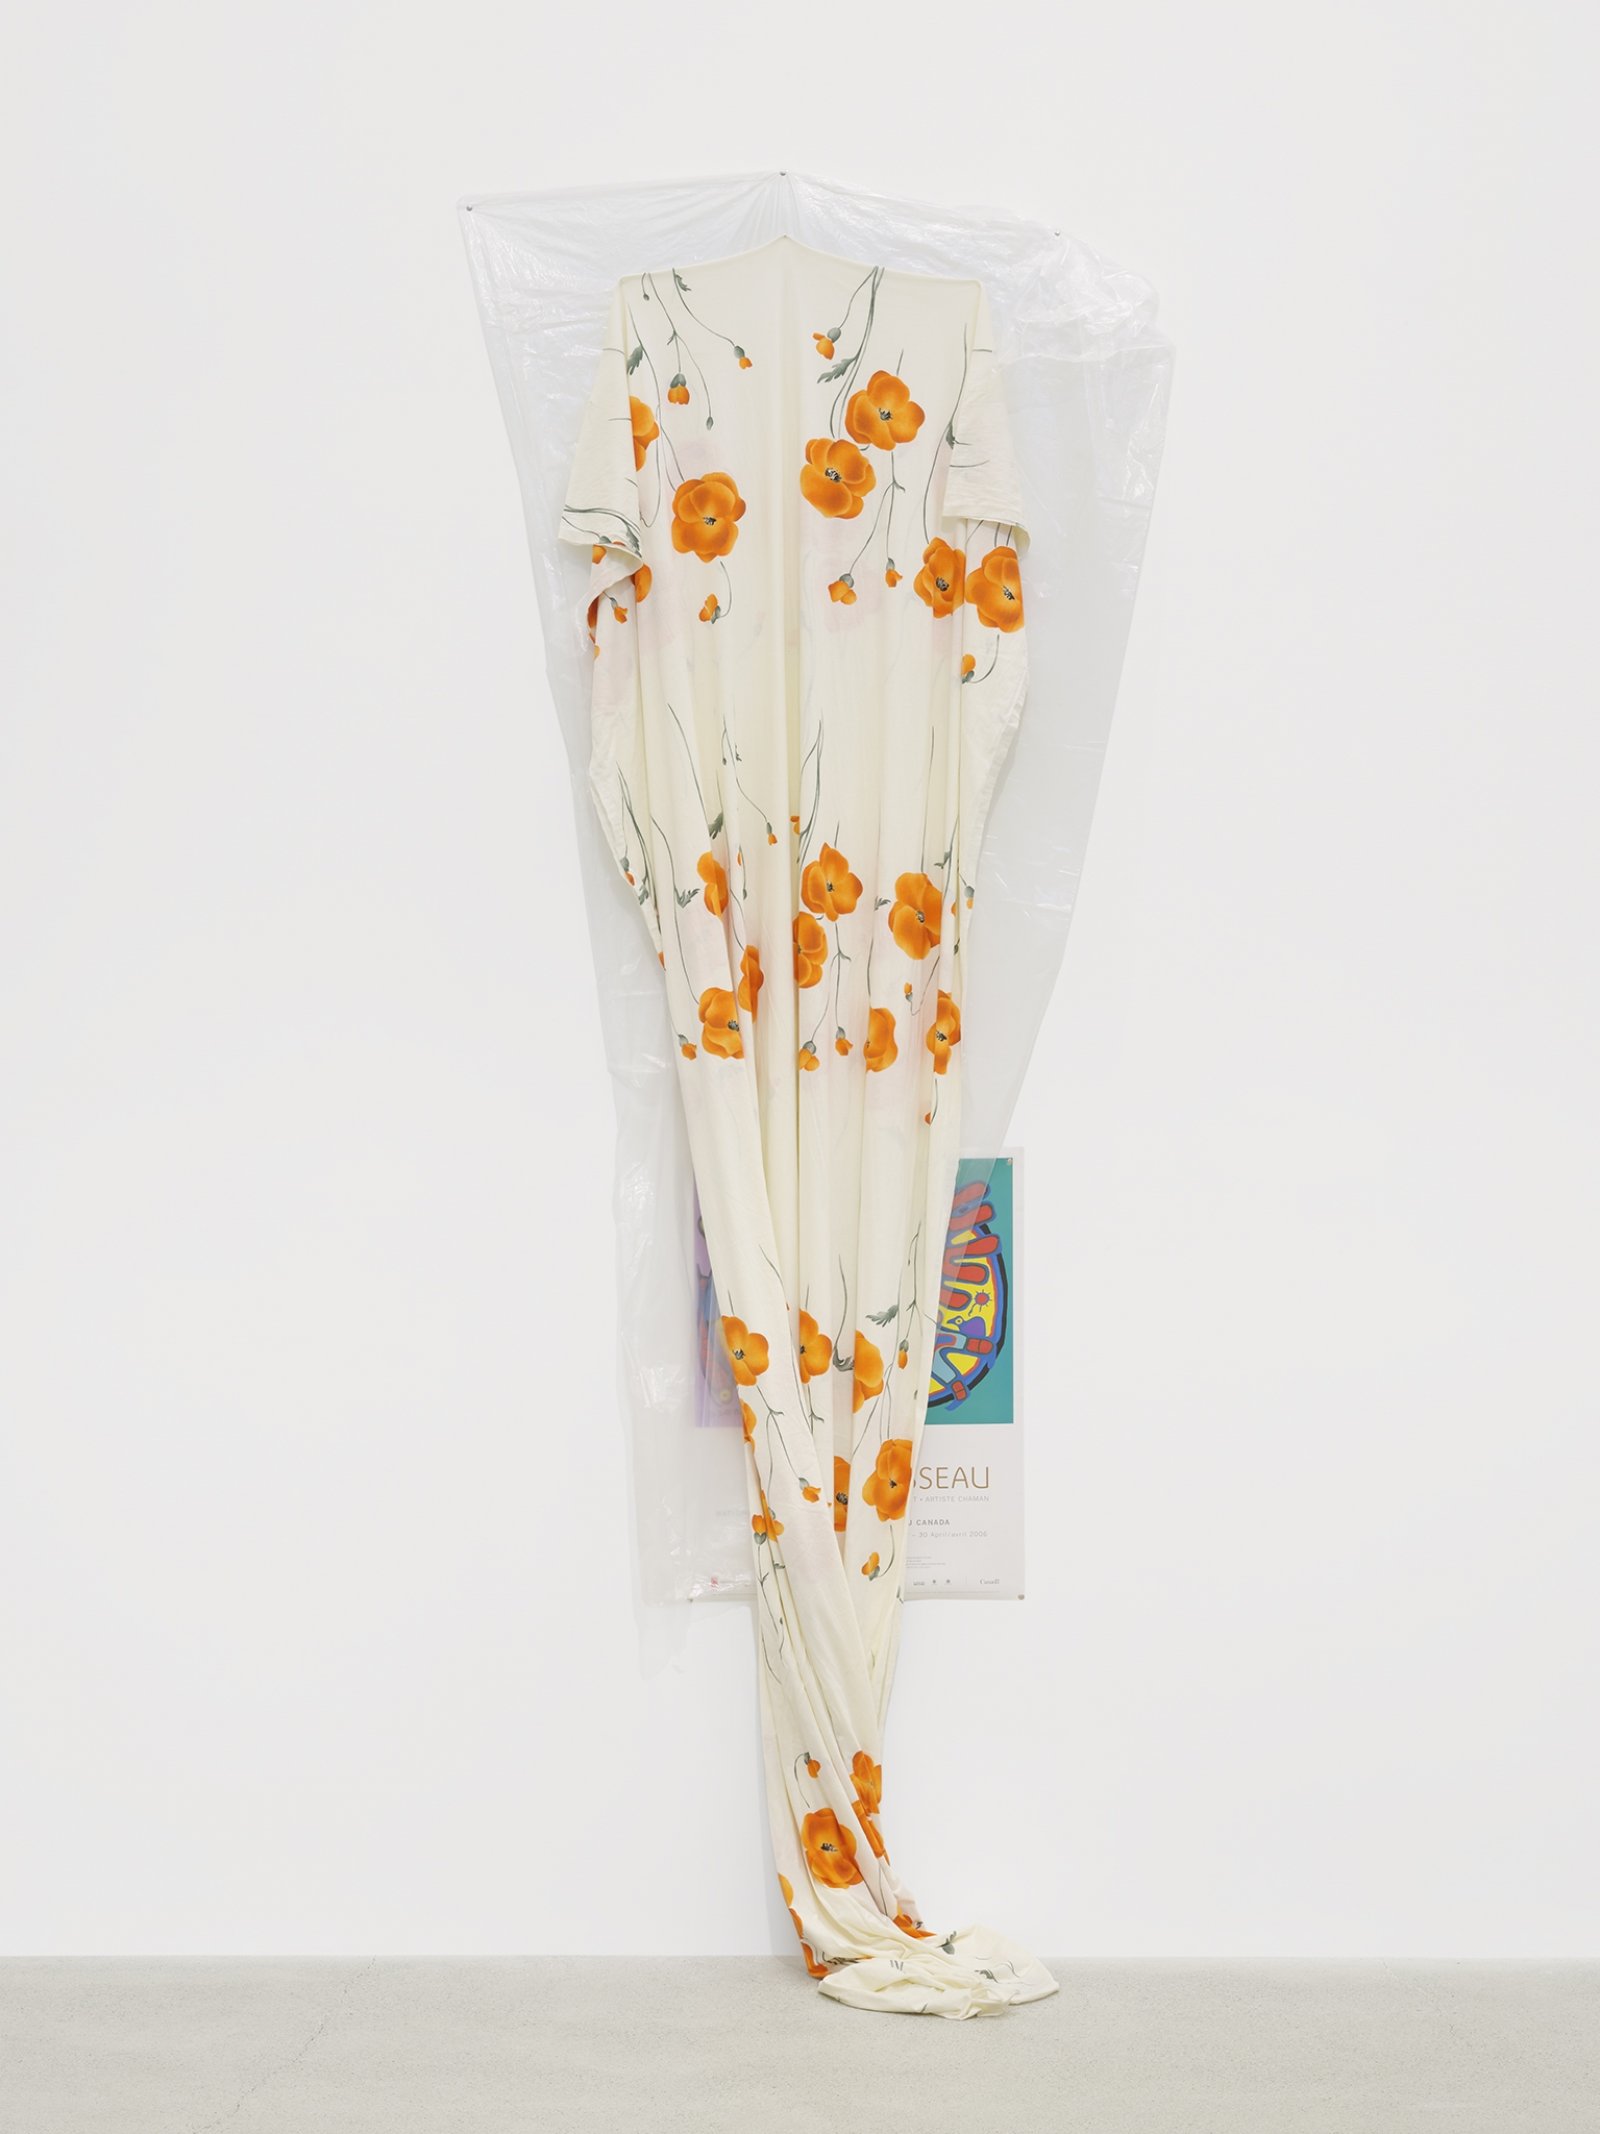 Duane Linklater, body, 2016, plastic sheeting, cotton cloth, nails, thumb tacks, paper poster from National Gallery of Canada, 124 x 35 x 15 in. (315 x 89 x 38 cm)